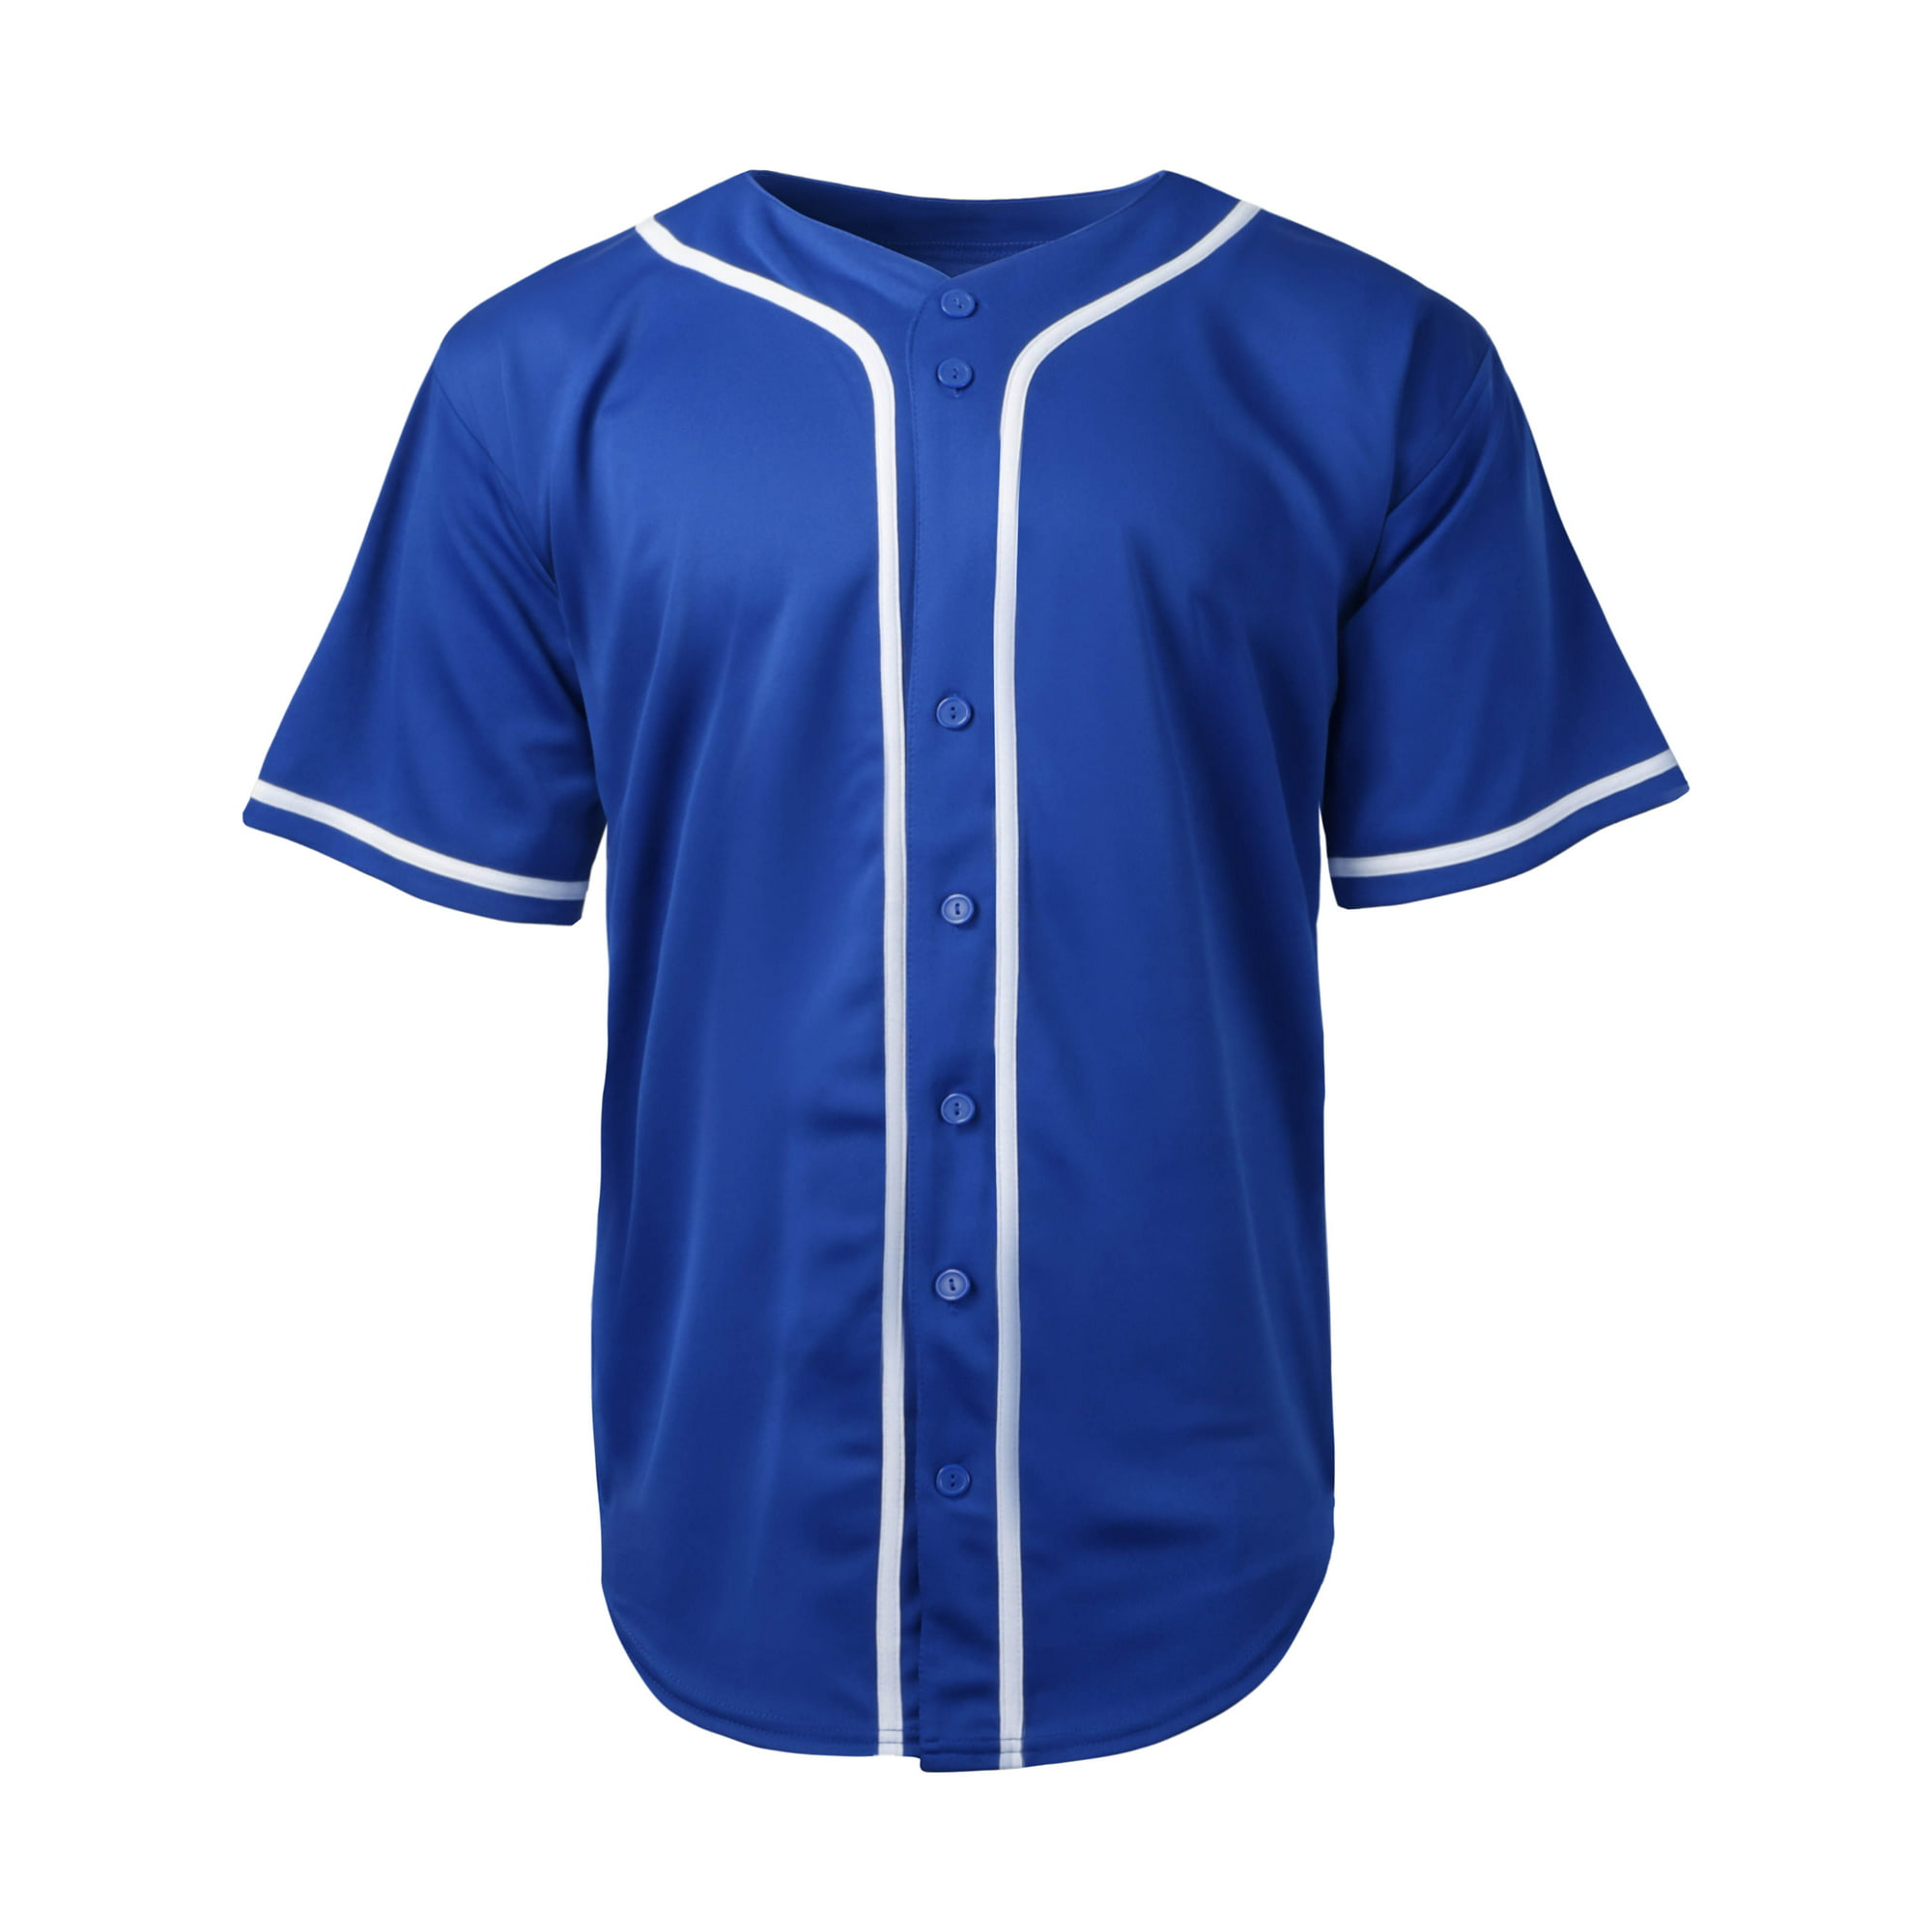 Ma Croix Mens Team Sports Printable Blank Jersey Baseball Collar Button Up  T Shirts 